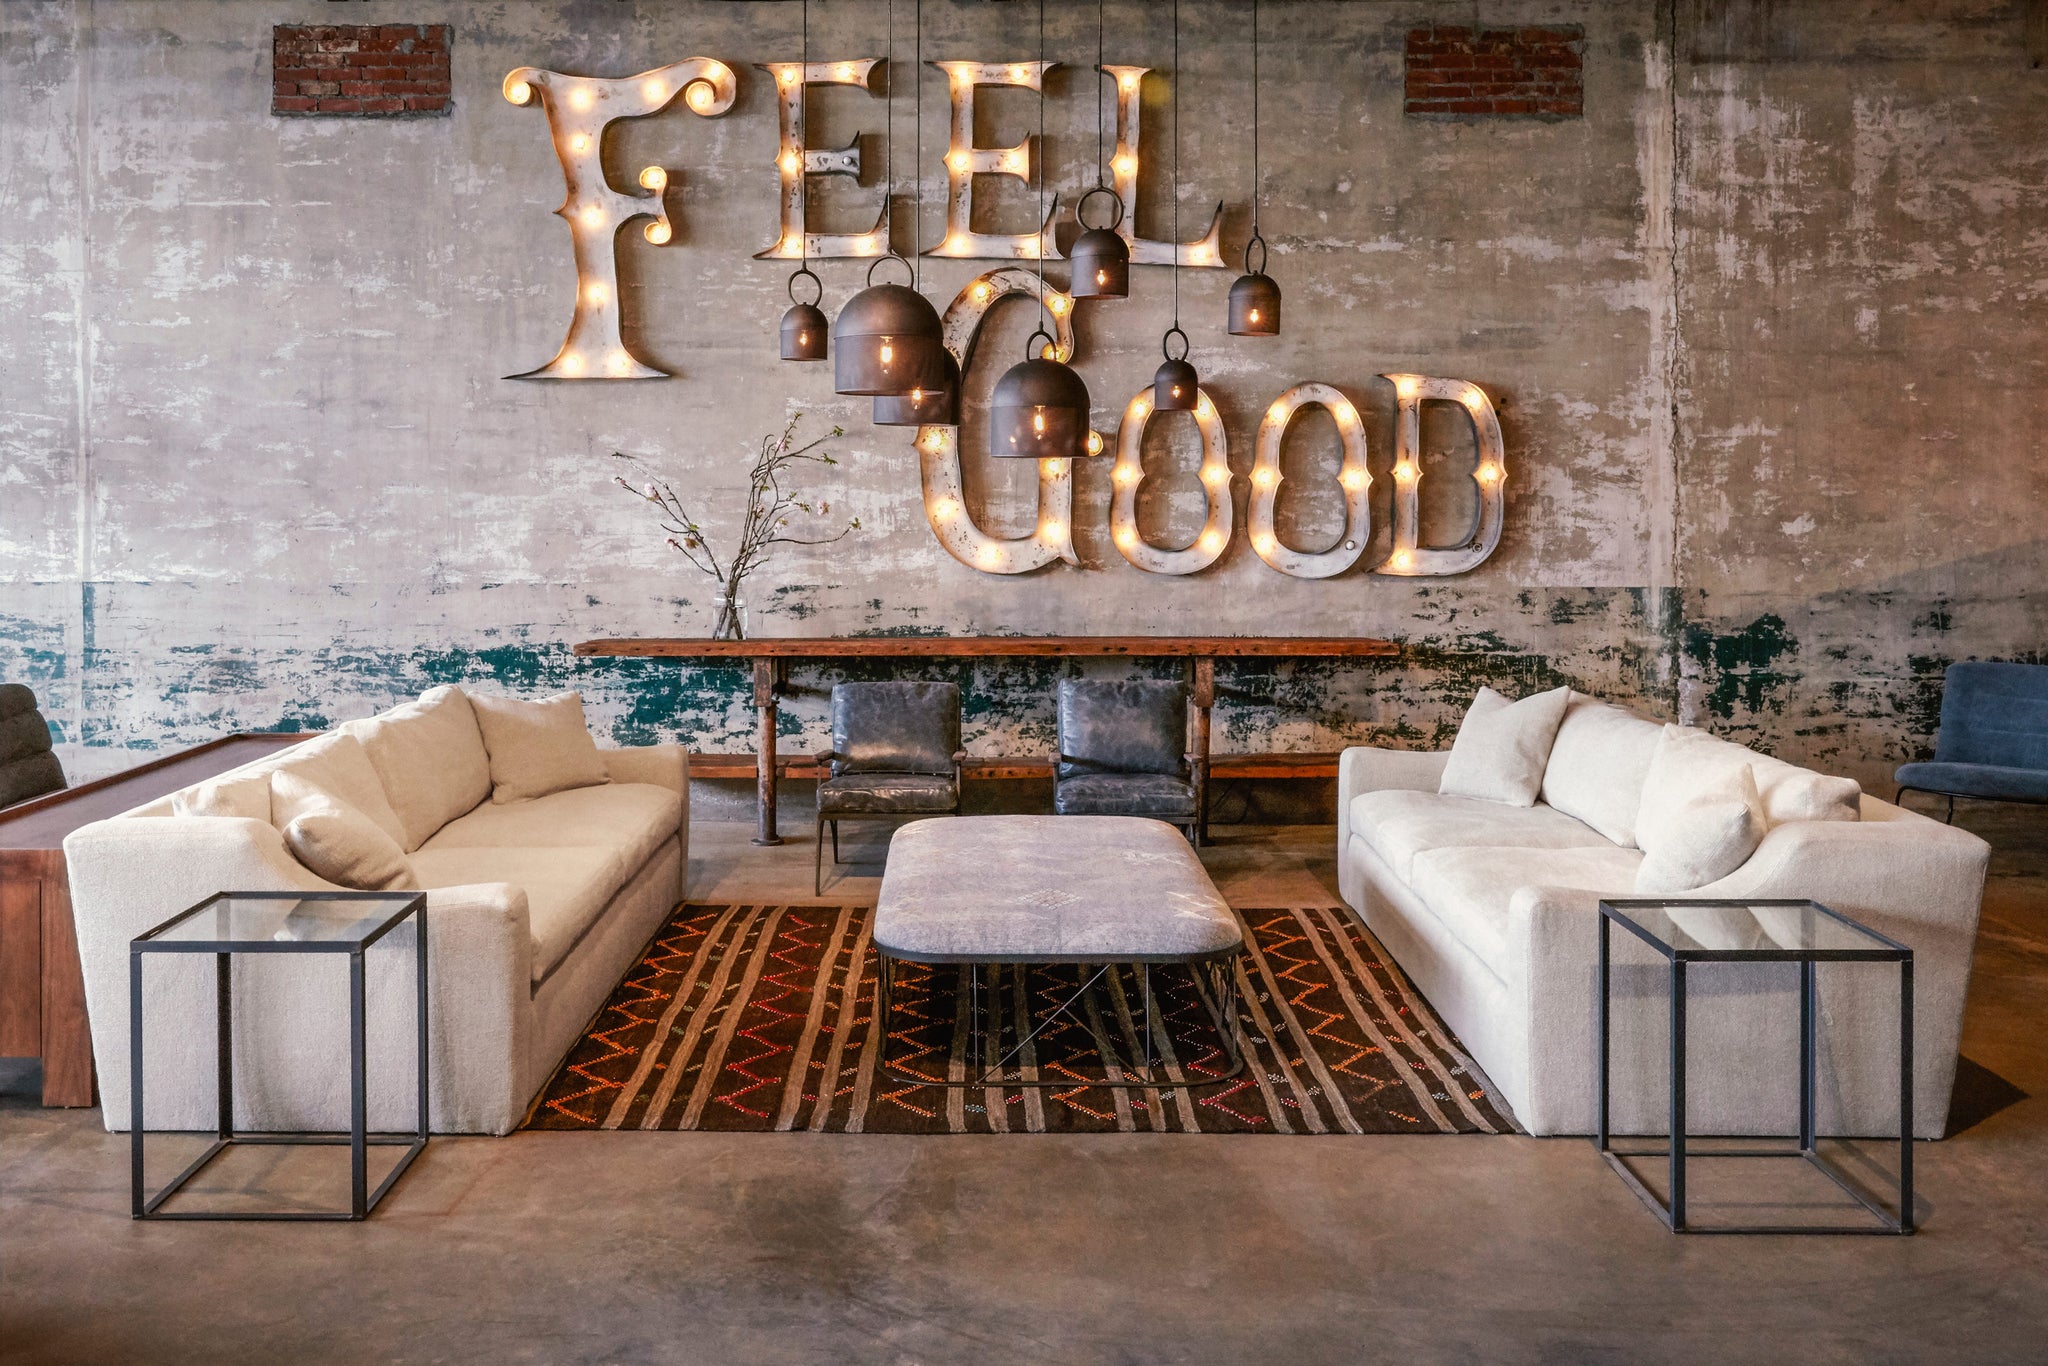  Two Grant sofas Brevard Burlap are facing each other in a large showroom space. There is a Feel Goof metal sign with lights hanging on the back concrete wall. A large rectangular ottoman is in the middle and two square side tables at the end of each sofa. There are 2 leather chairs in front of the wall. Photographed in Lan Oatmeal. 